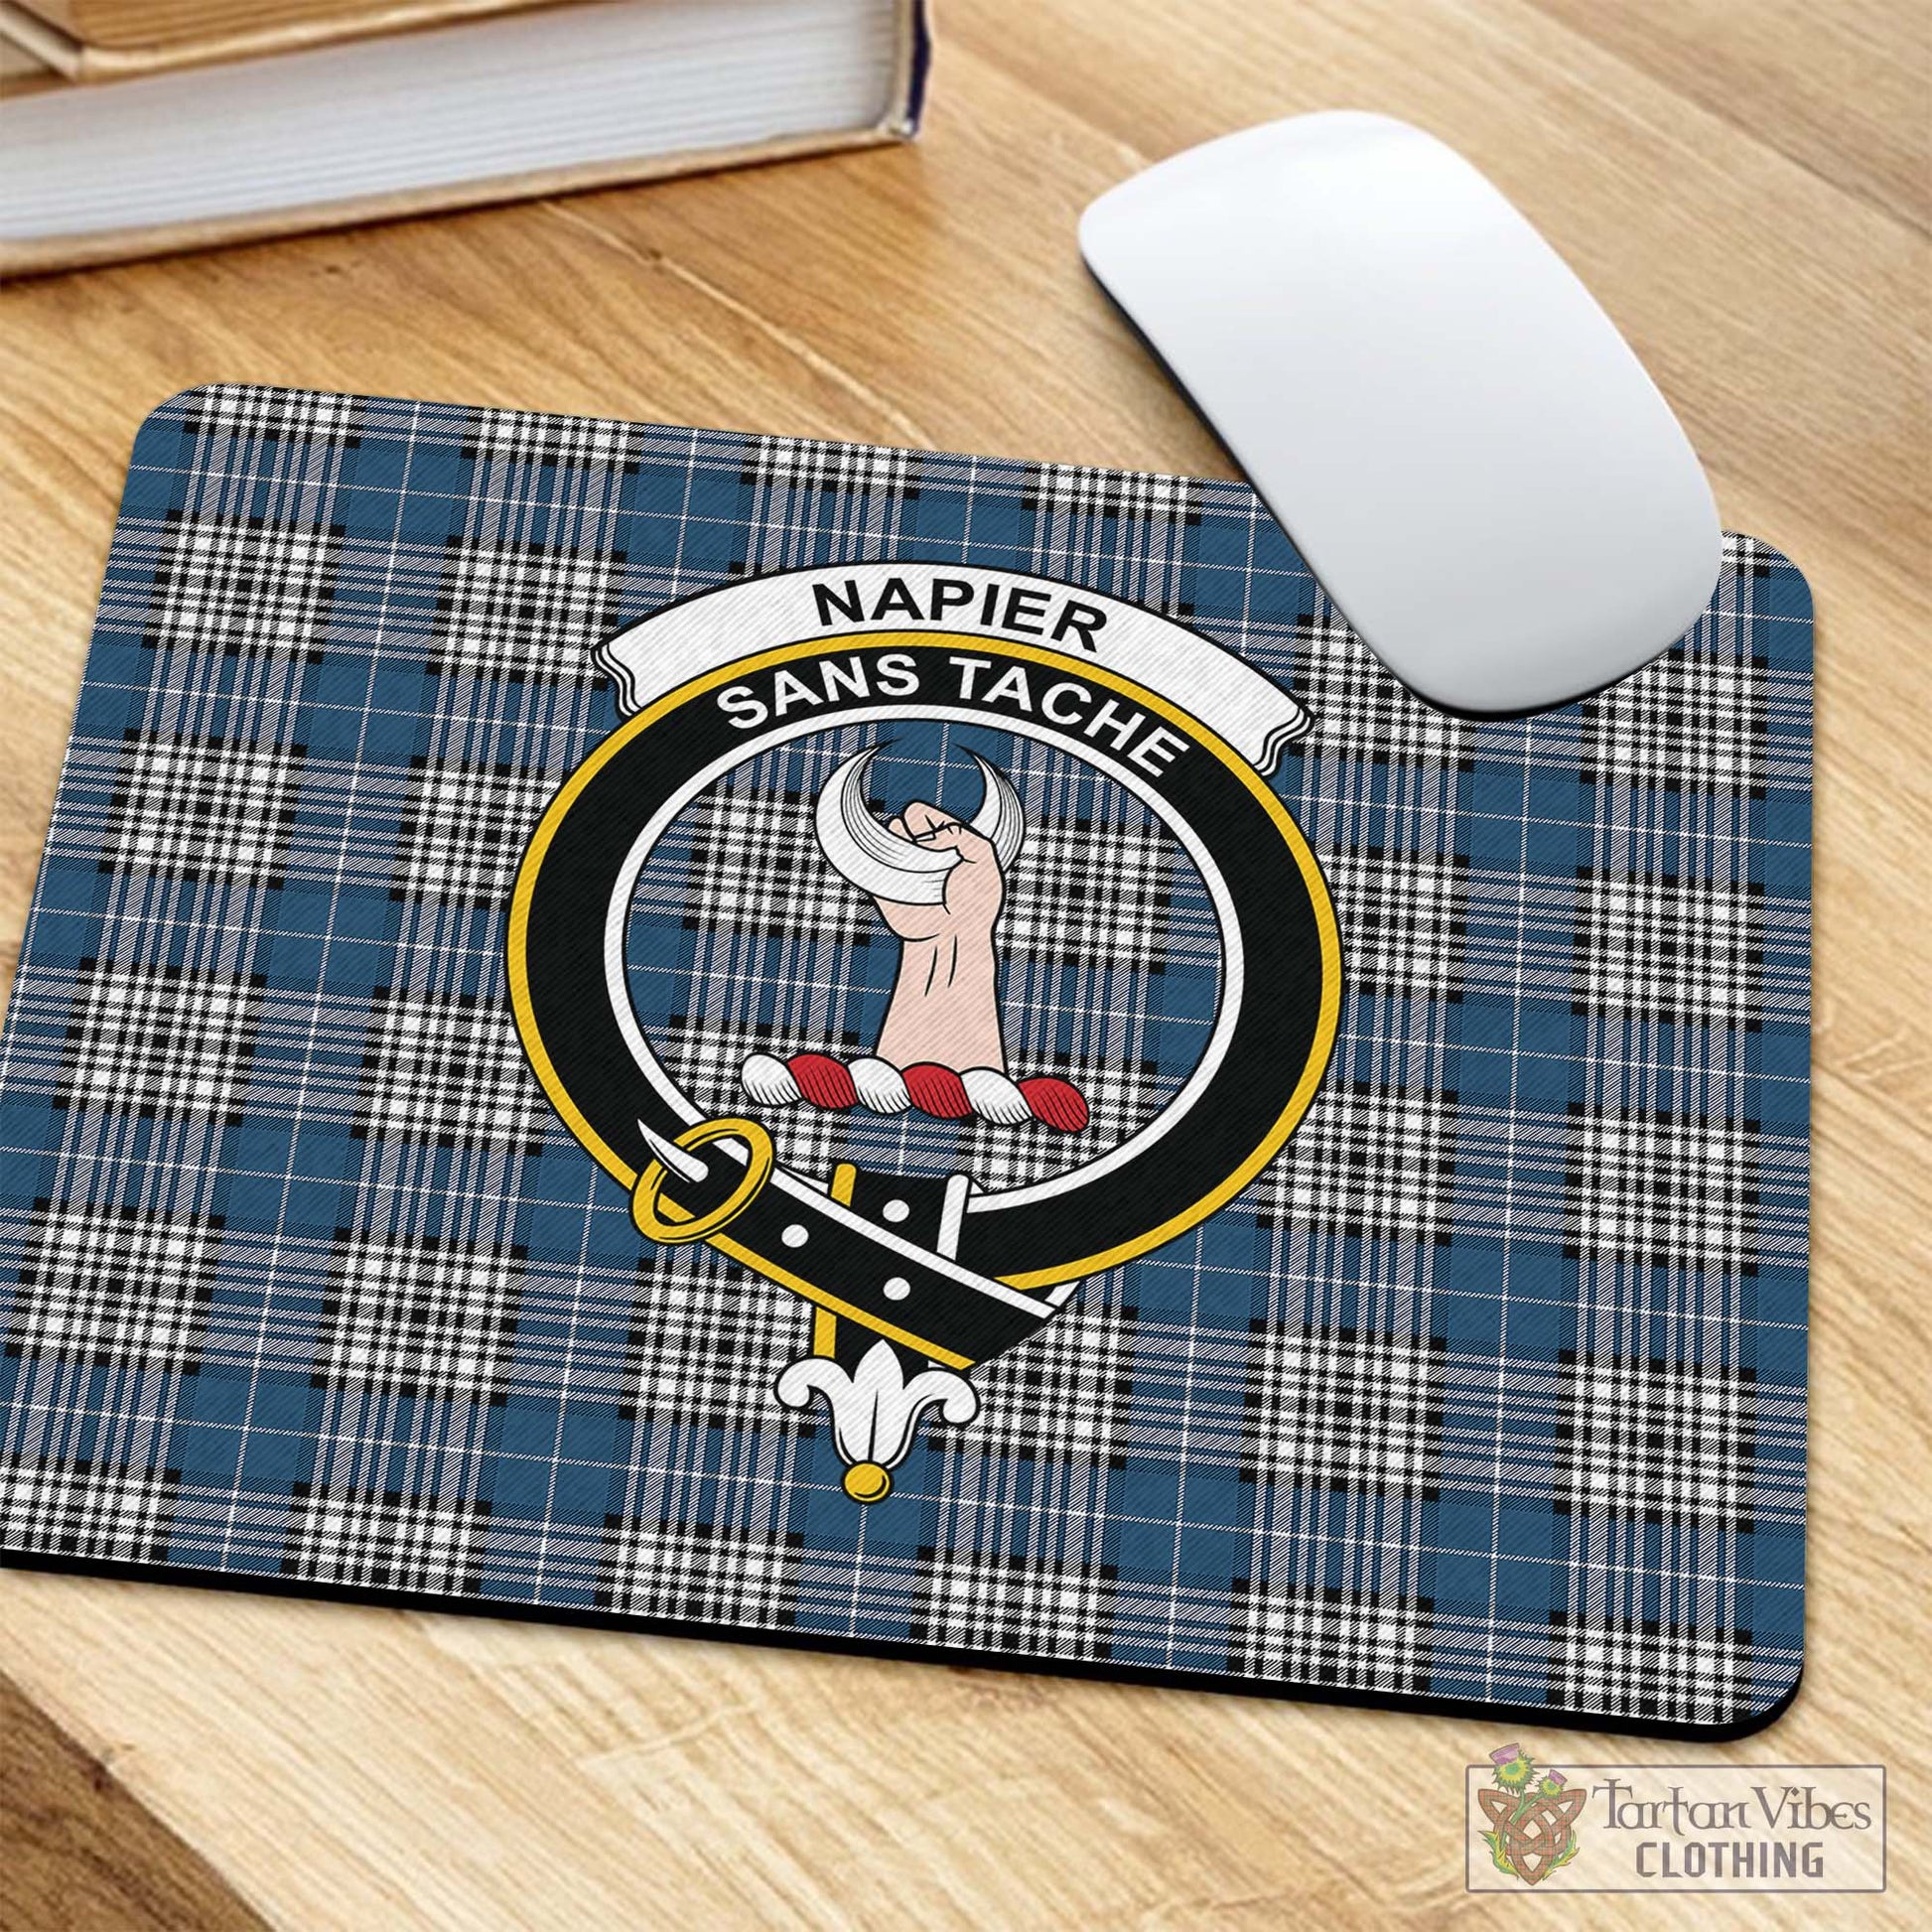 Tartan Vibes Clothing Napier Modern Tartan Mouse Pad with Family Crest